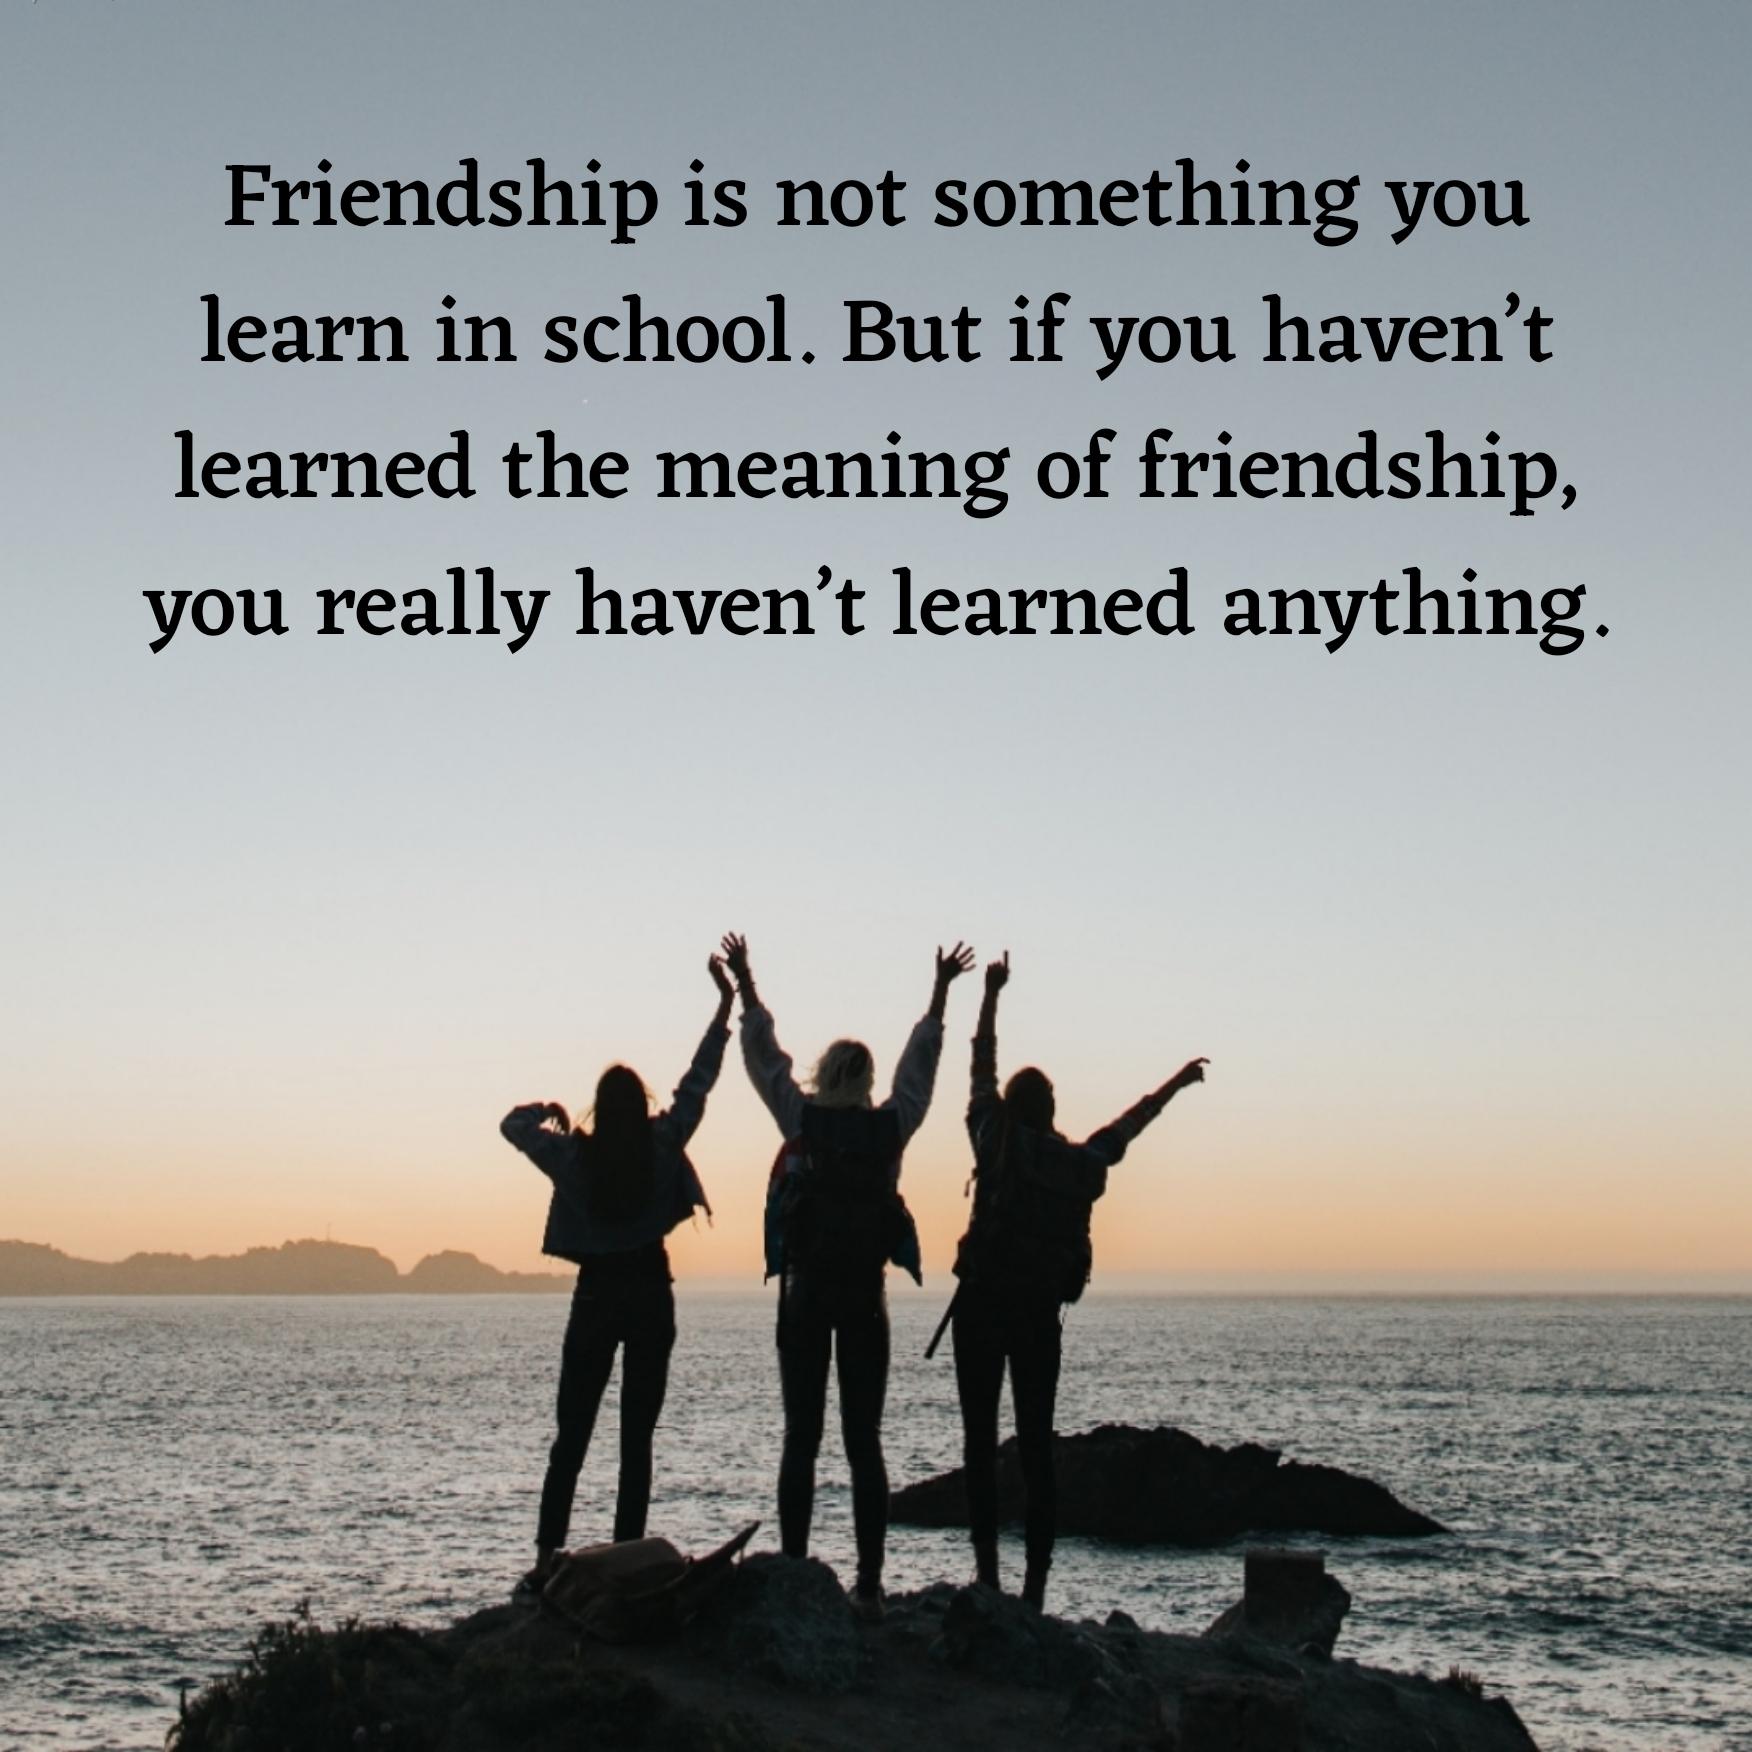 Friendship is not something you learn in school